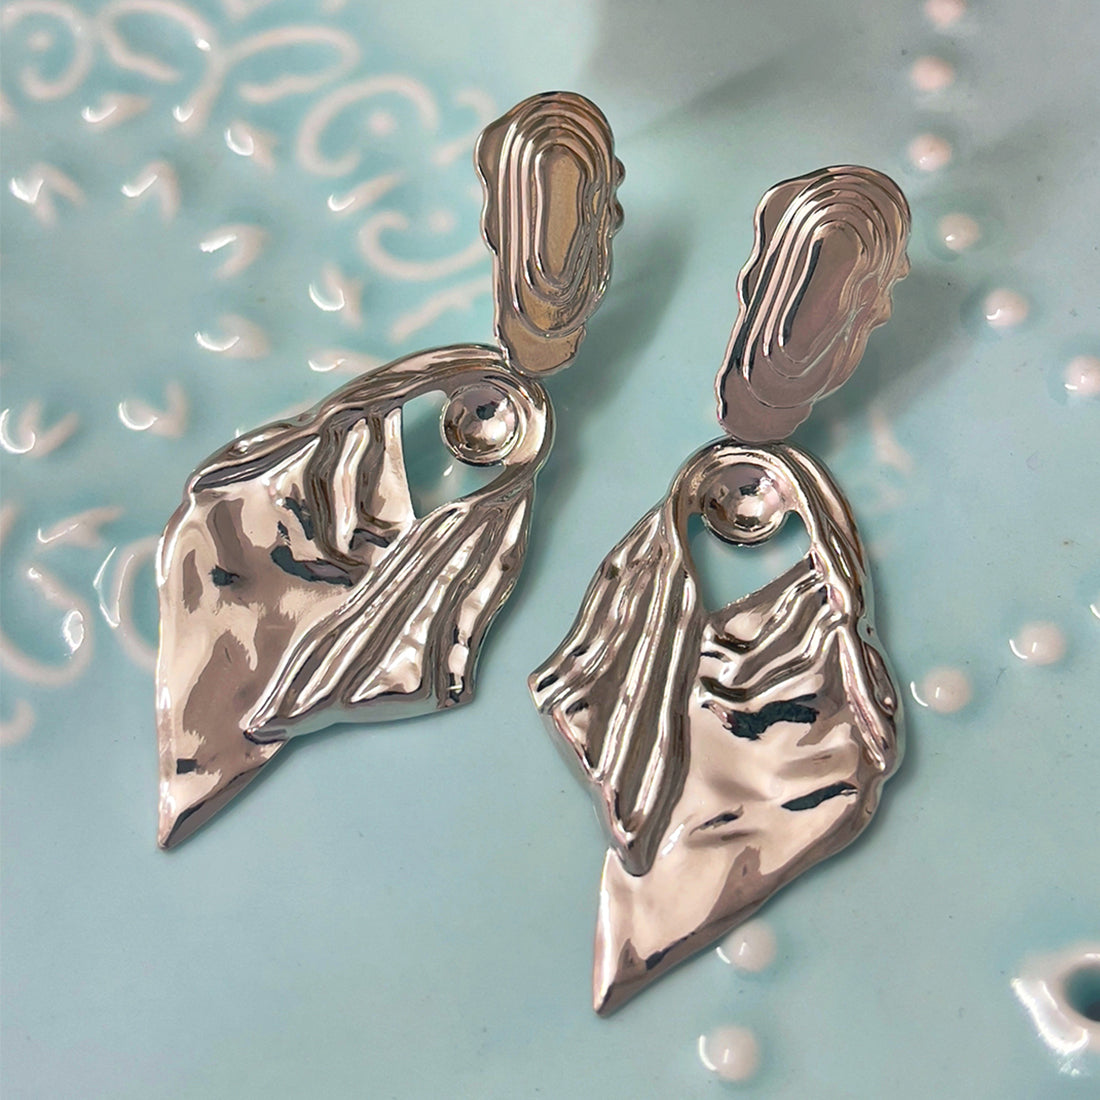 Oversized Hammered Silver-Toned Leaf Drop Earrings